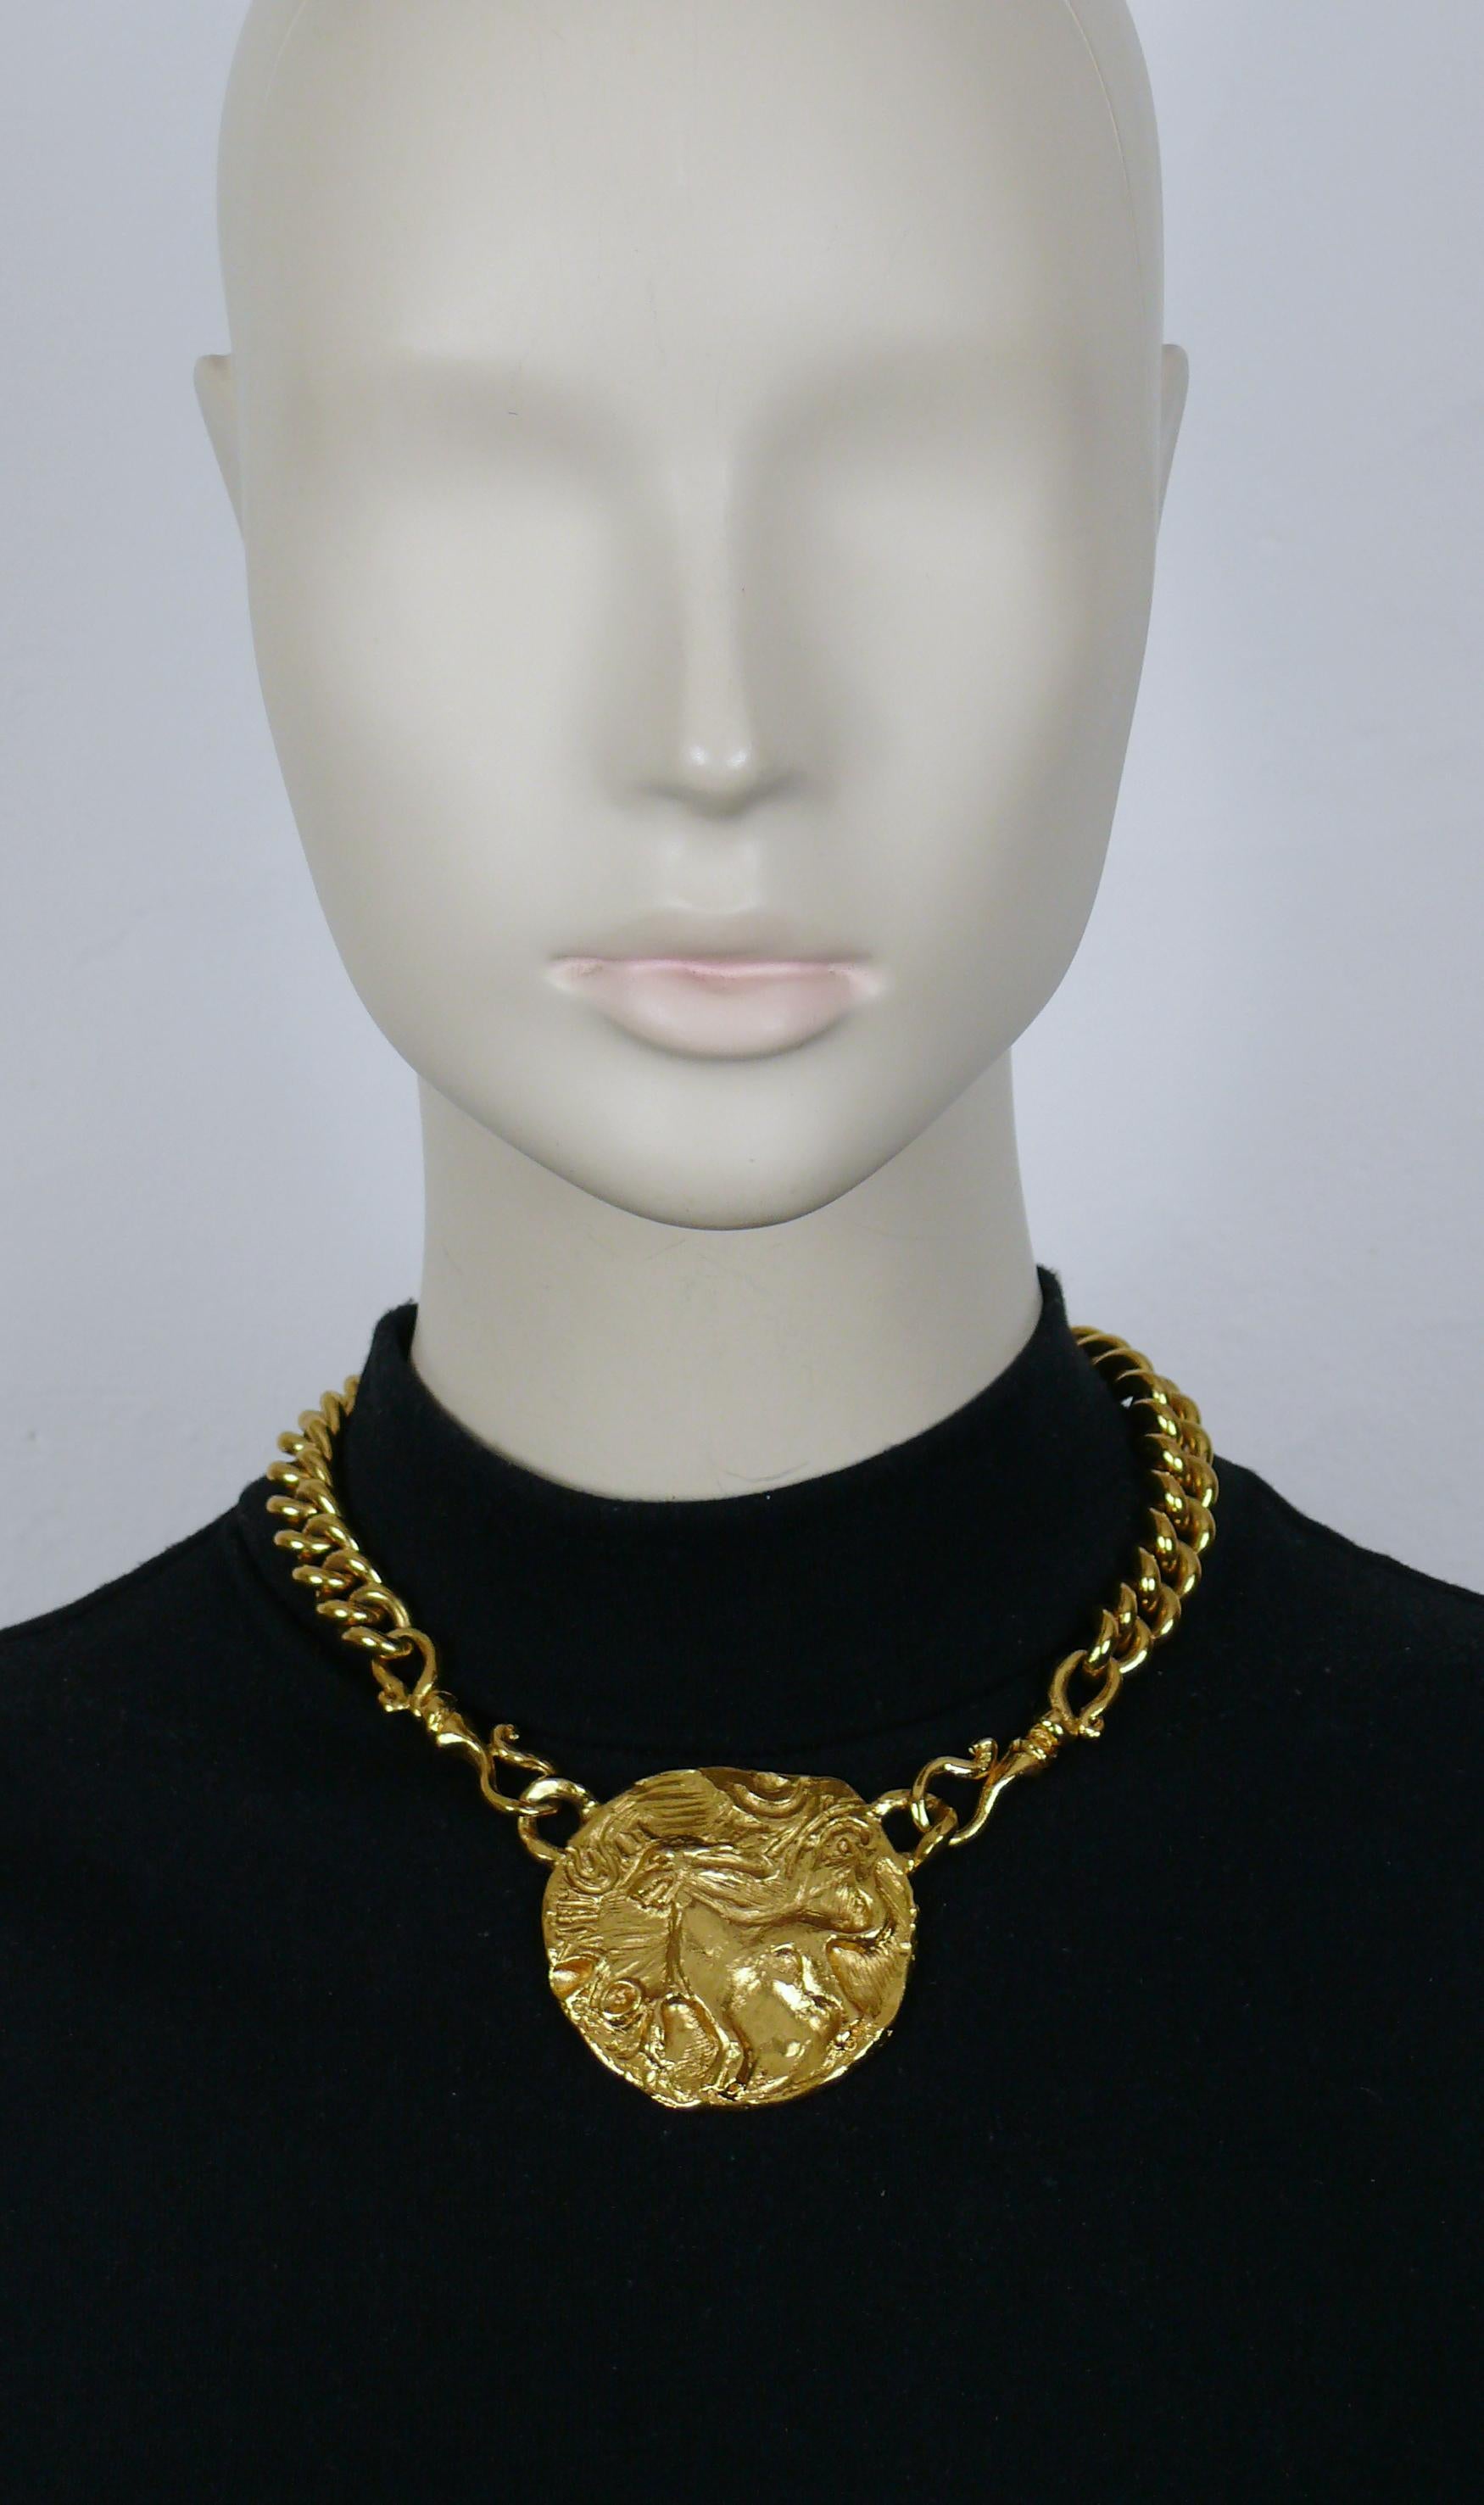 YVES SAINT LAURENT vintage chunky gold tone chain necklace featuring a raised and textured mythological creature medallion.

Toggle and hearts closure with YVES SAINT LAURENT signatures.
Adjustable length.

Embossed YVES SAINT LAURENT on the heart